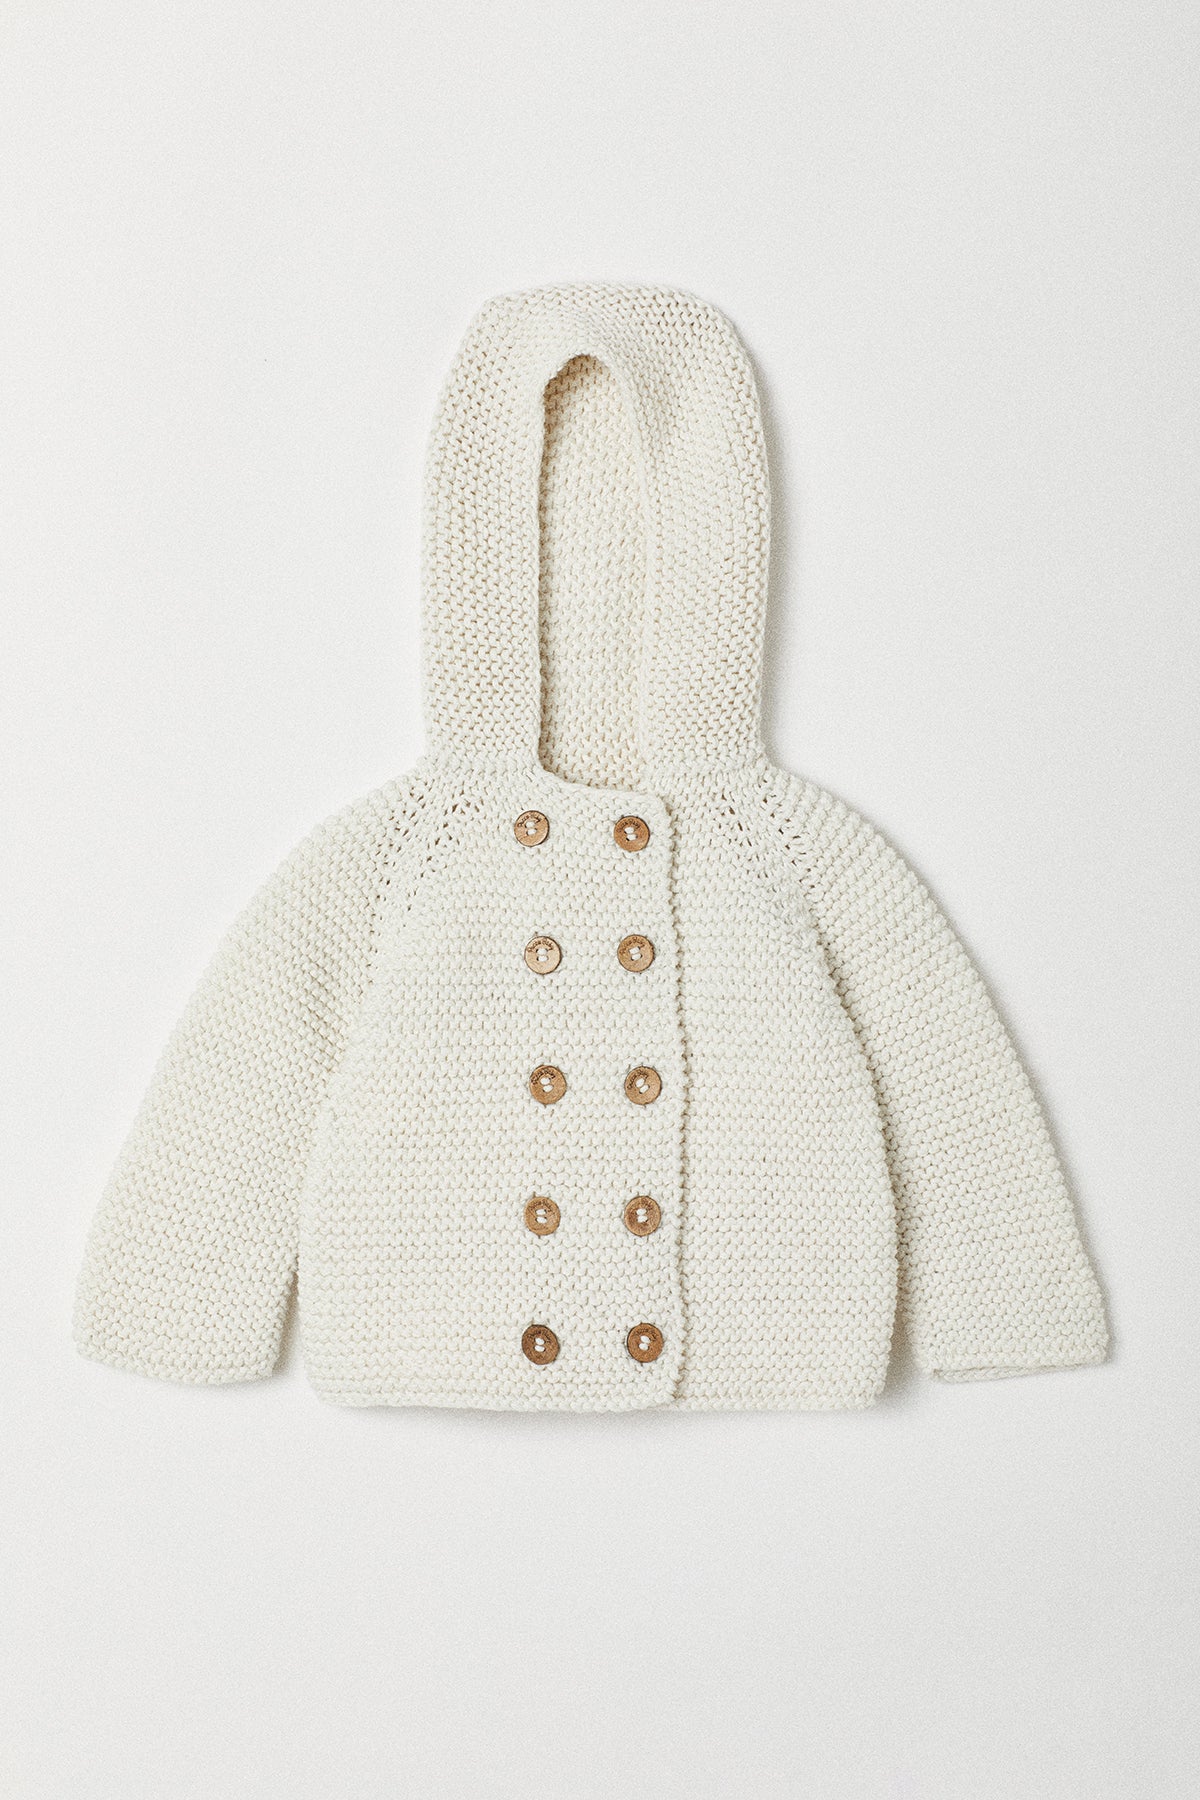 Handknitted Double Buttoned Cardigan | White | Made with Organic Cotton Yarn